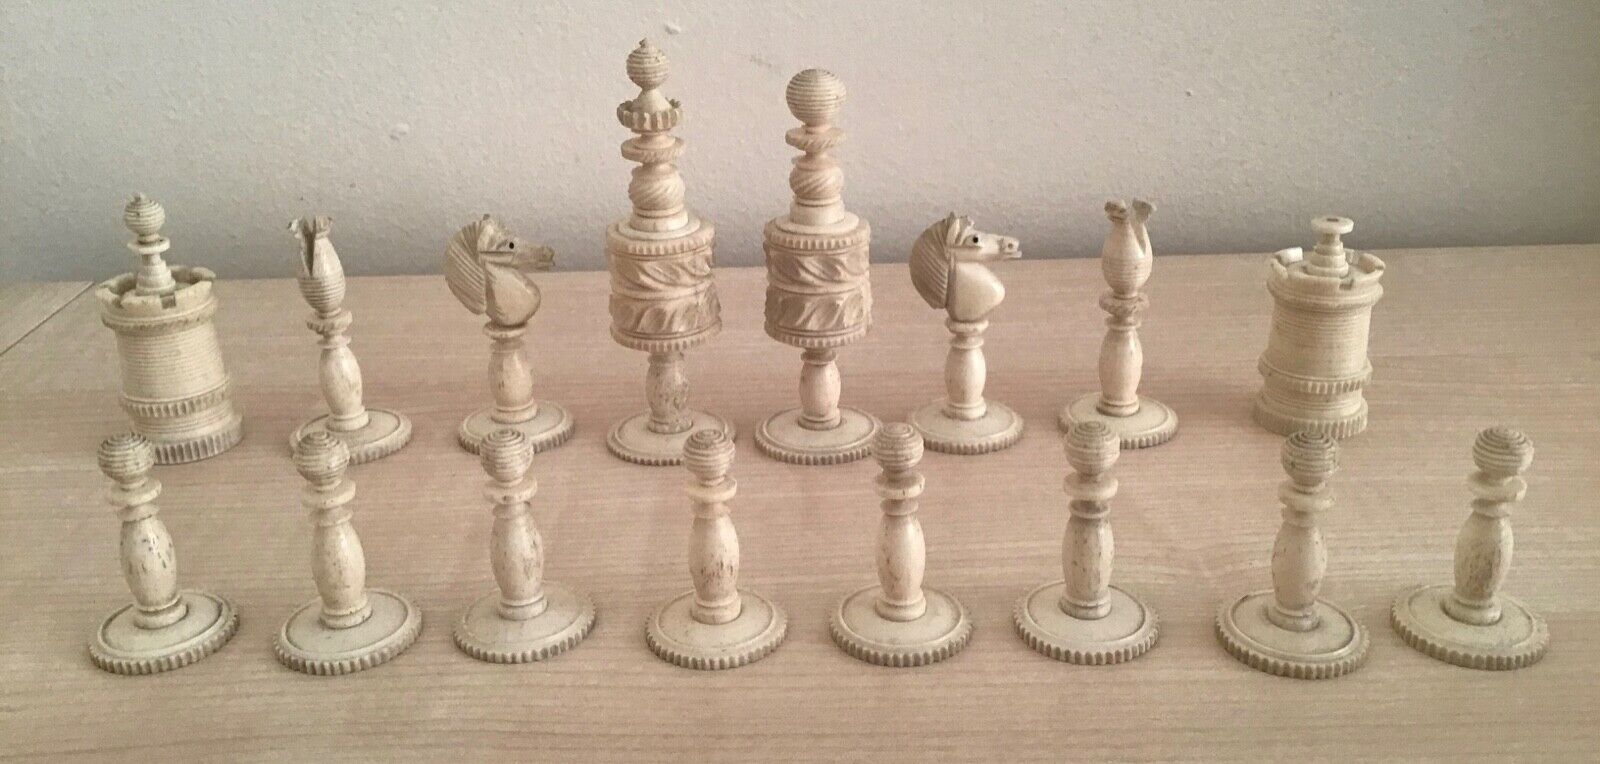 Mid/Late 19th c. Carved Chess set. English or Chinese. All pieces present.